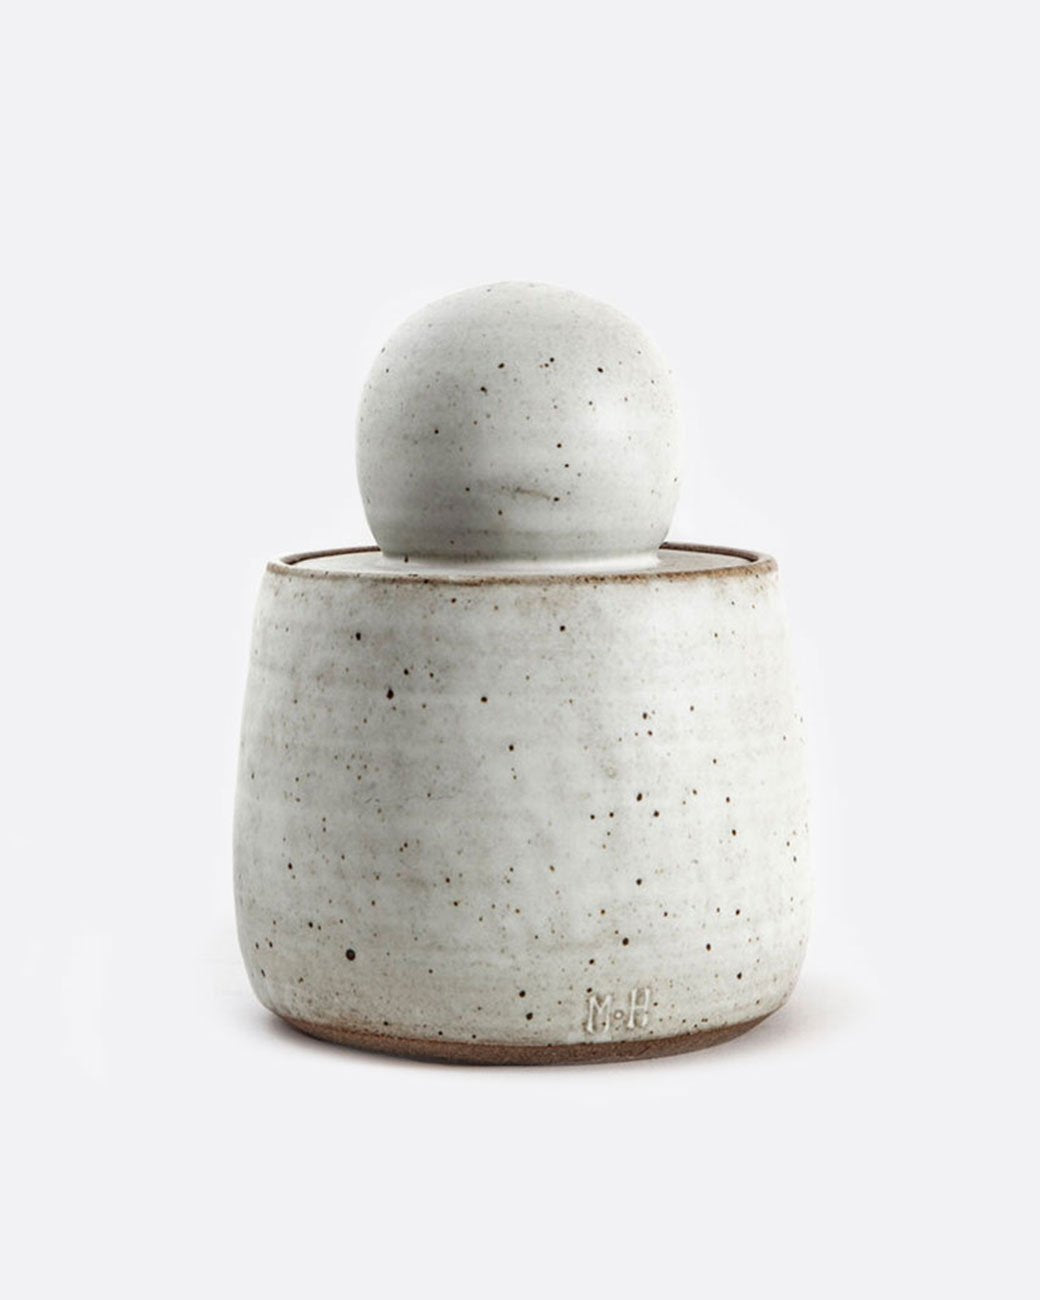 Single ceramic stash jar, shown from the front.